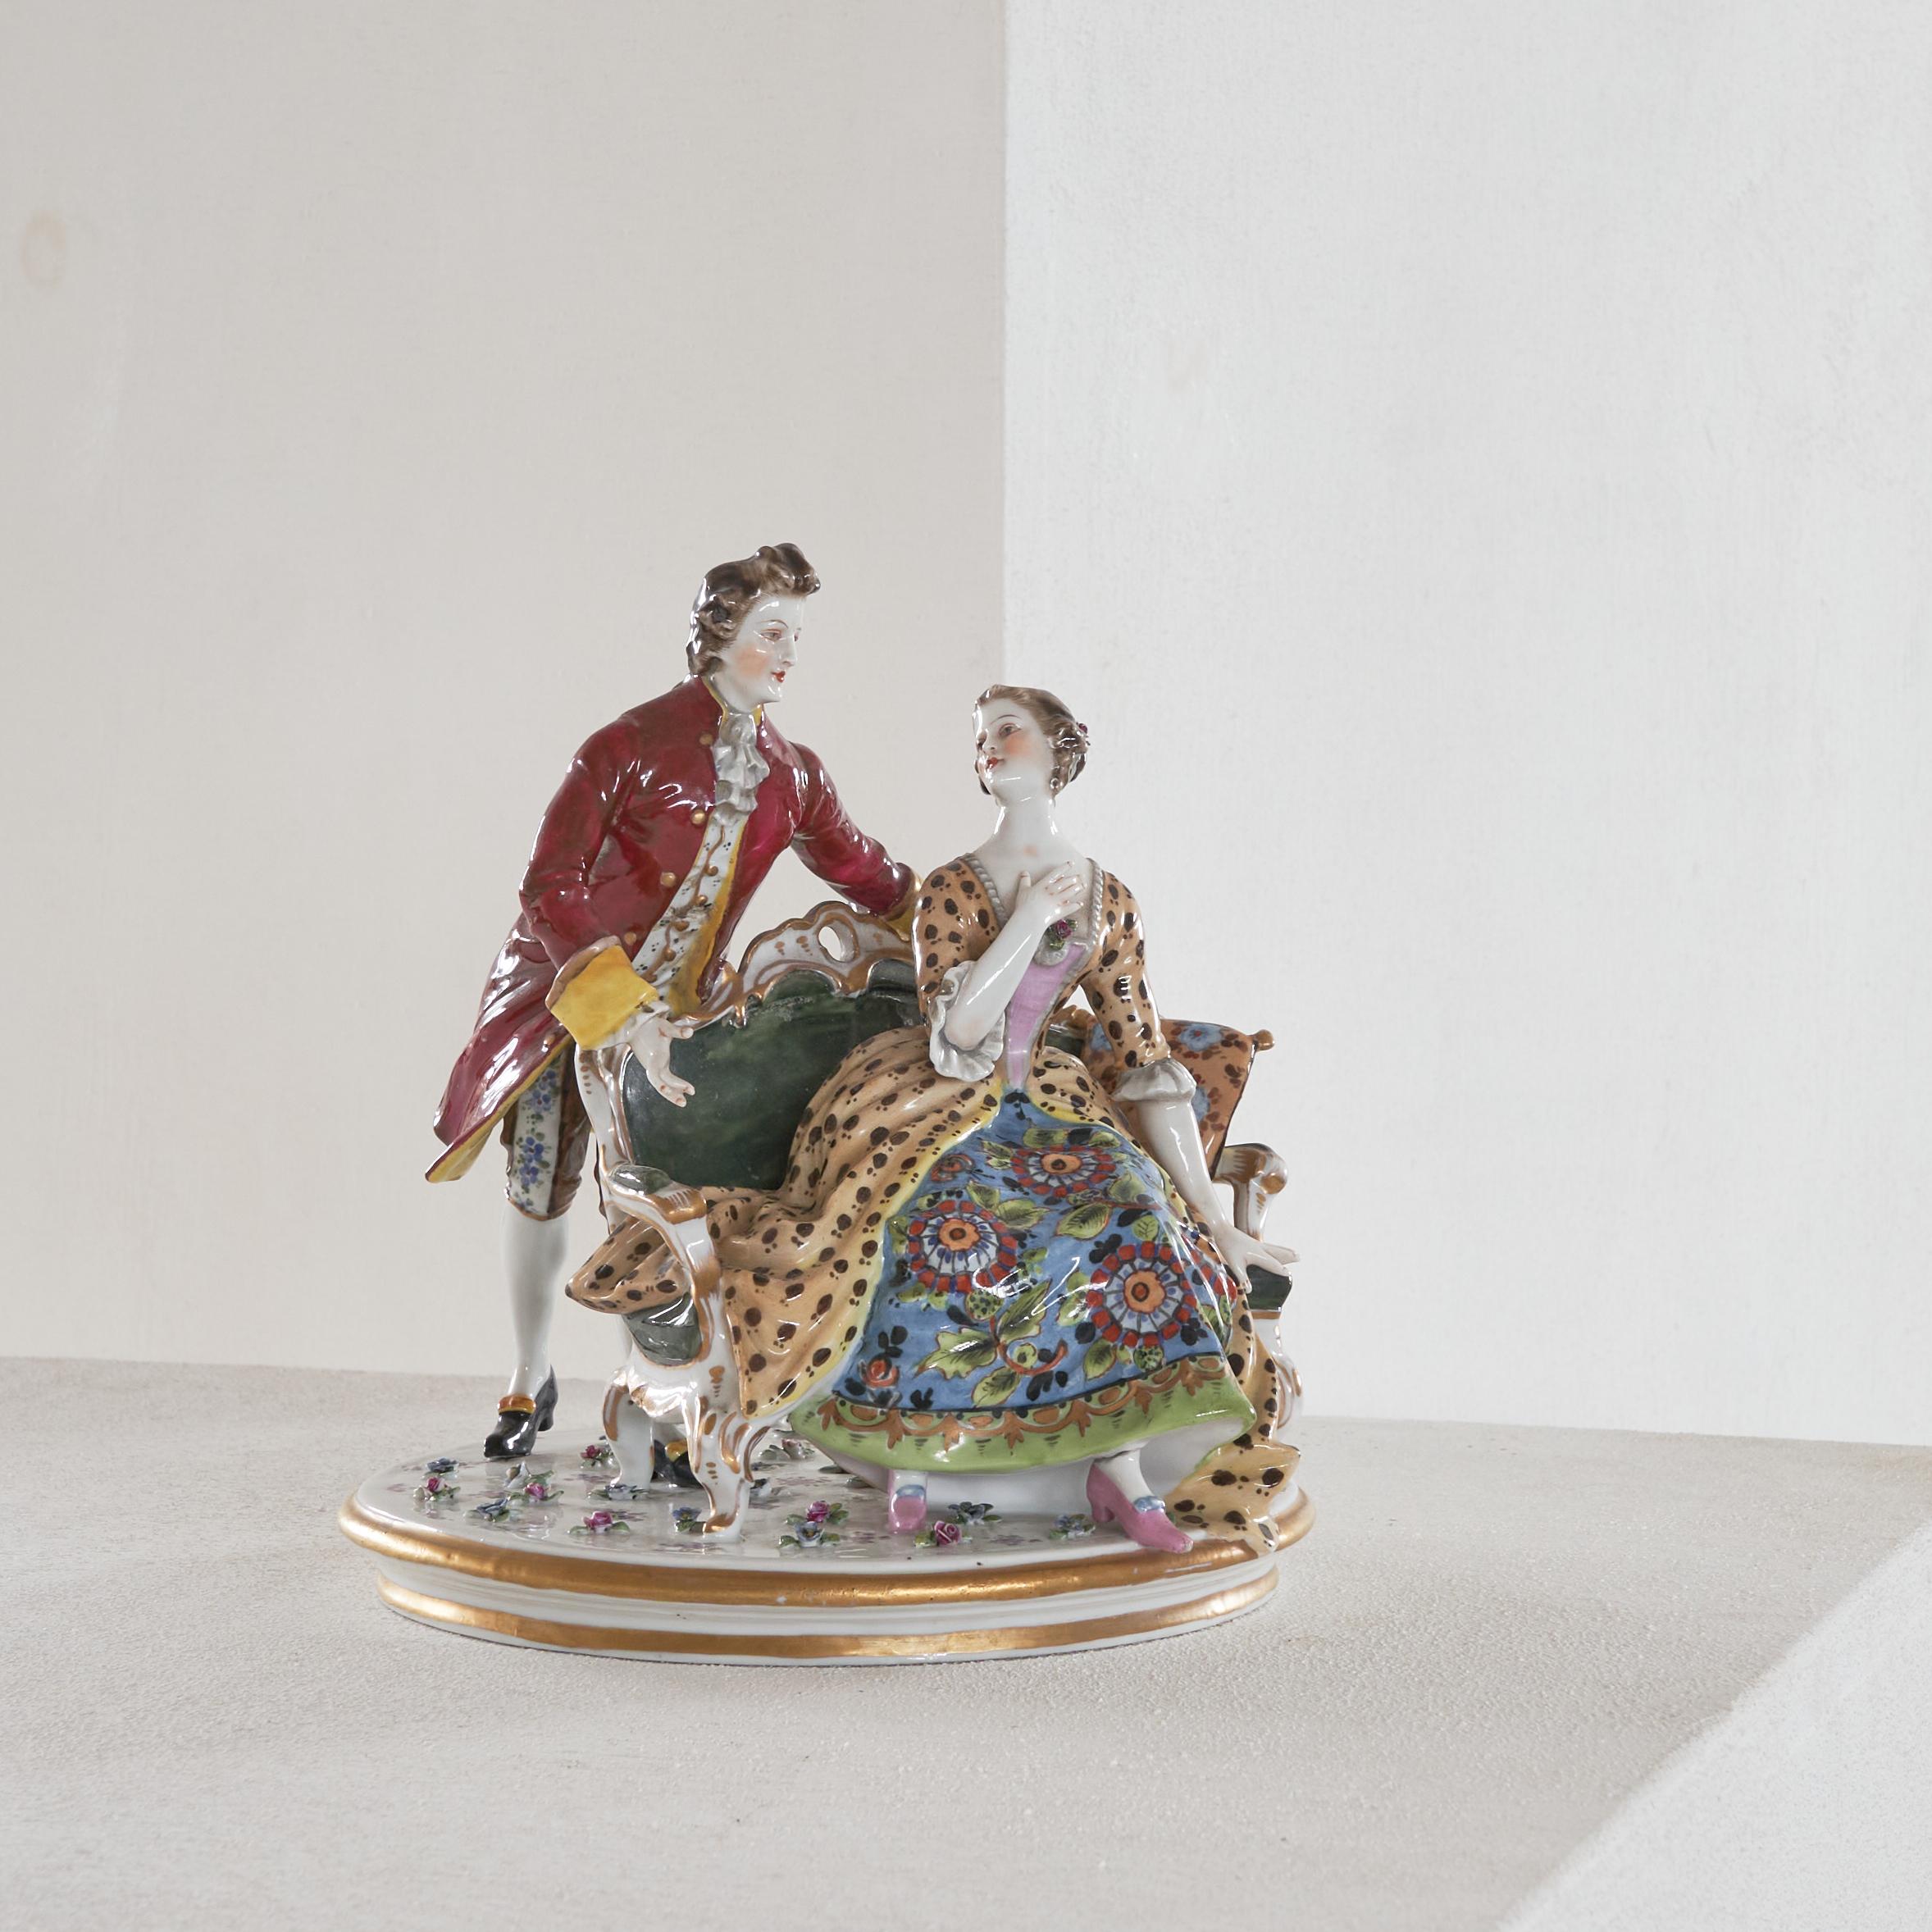 Antique Hand Painted Romantic Porcelain Figurine Group in the style of Meissen.

Beautifully hand painted figurine group in porcelain. Depicting a delightful and romantic scene, very suiting for the style. Beautiful quality and hand painted details,